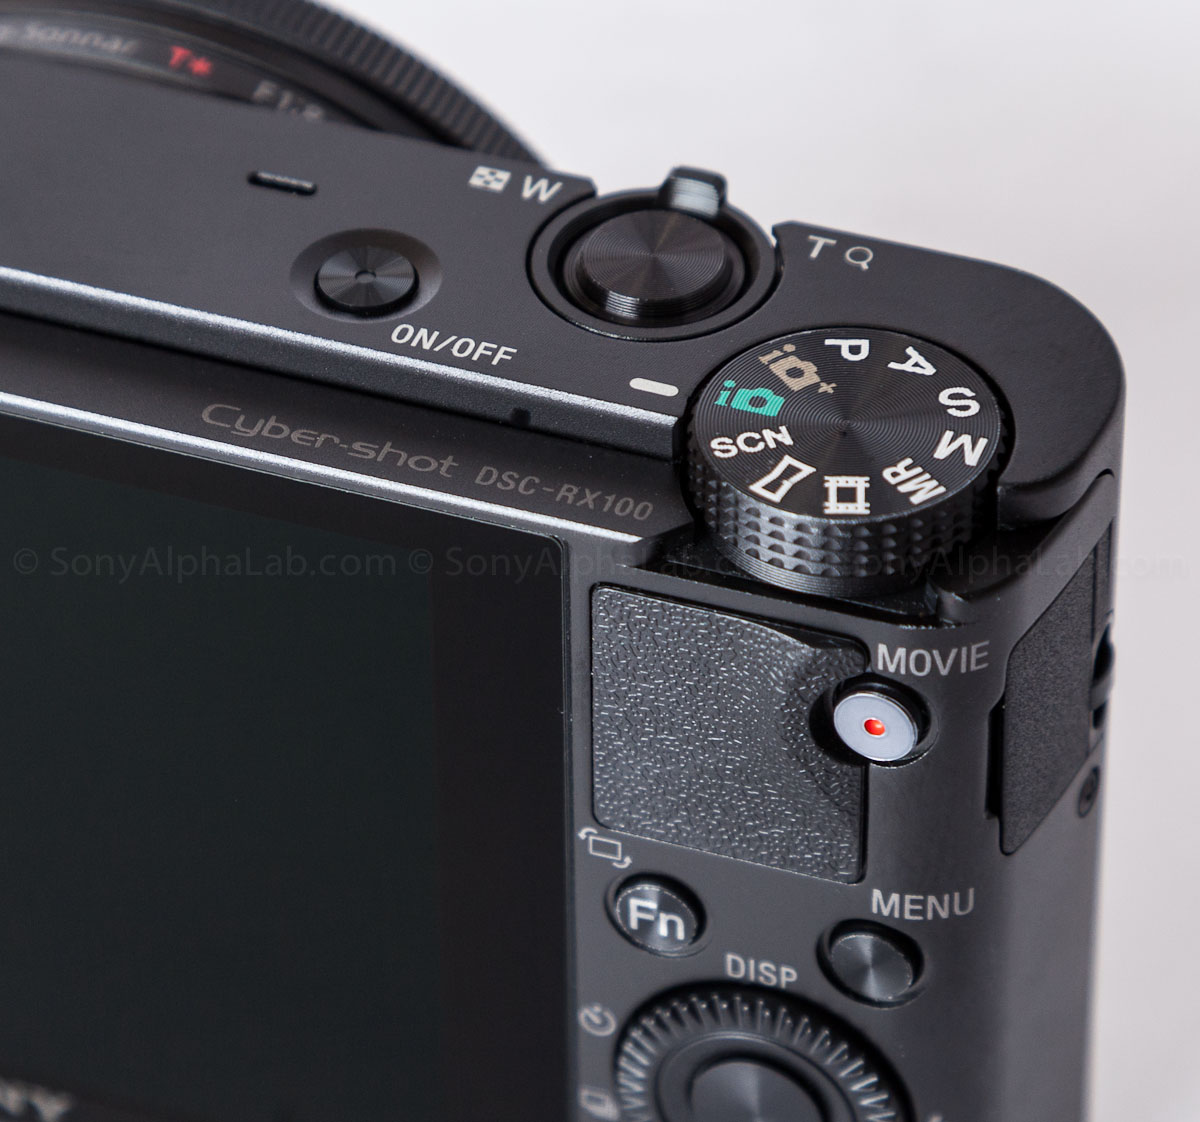 Sony Rx100 - Hands on Review